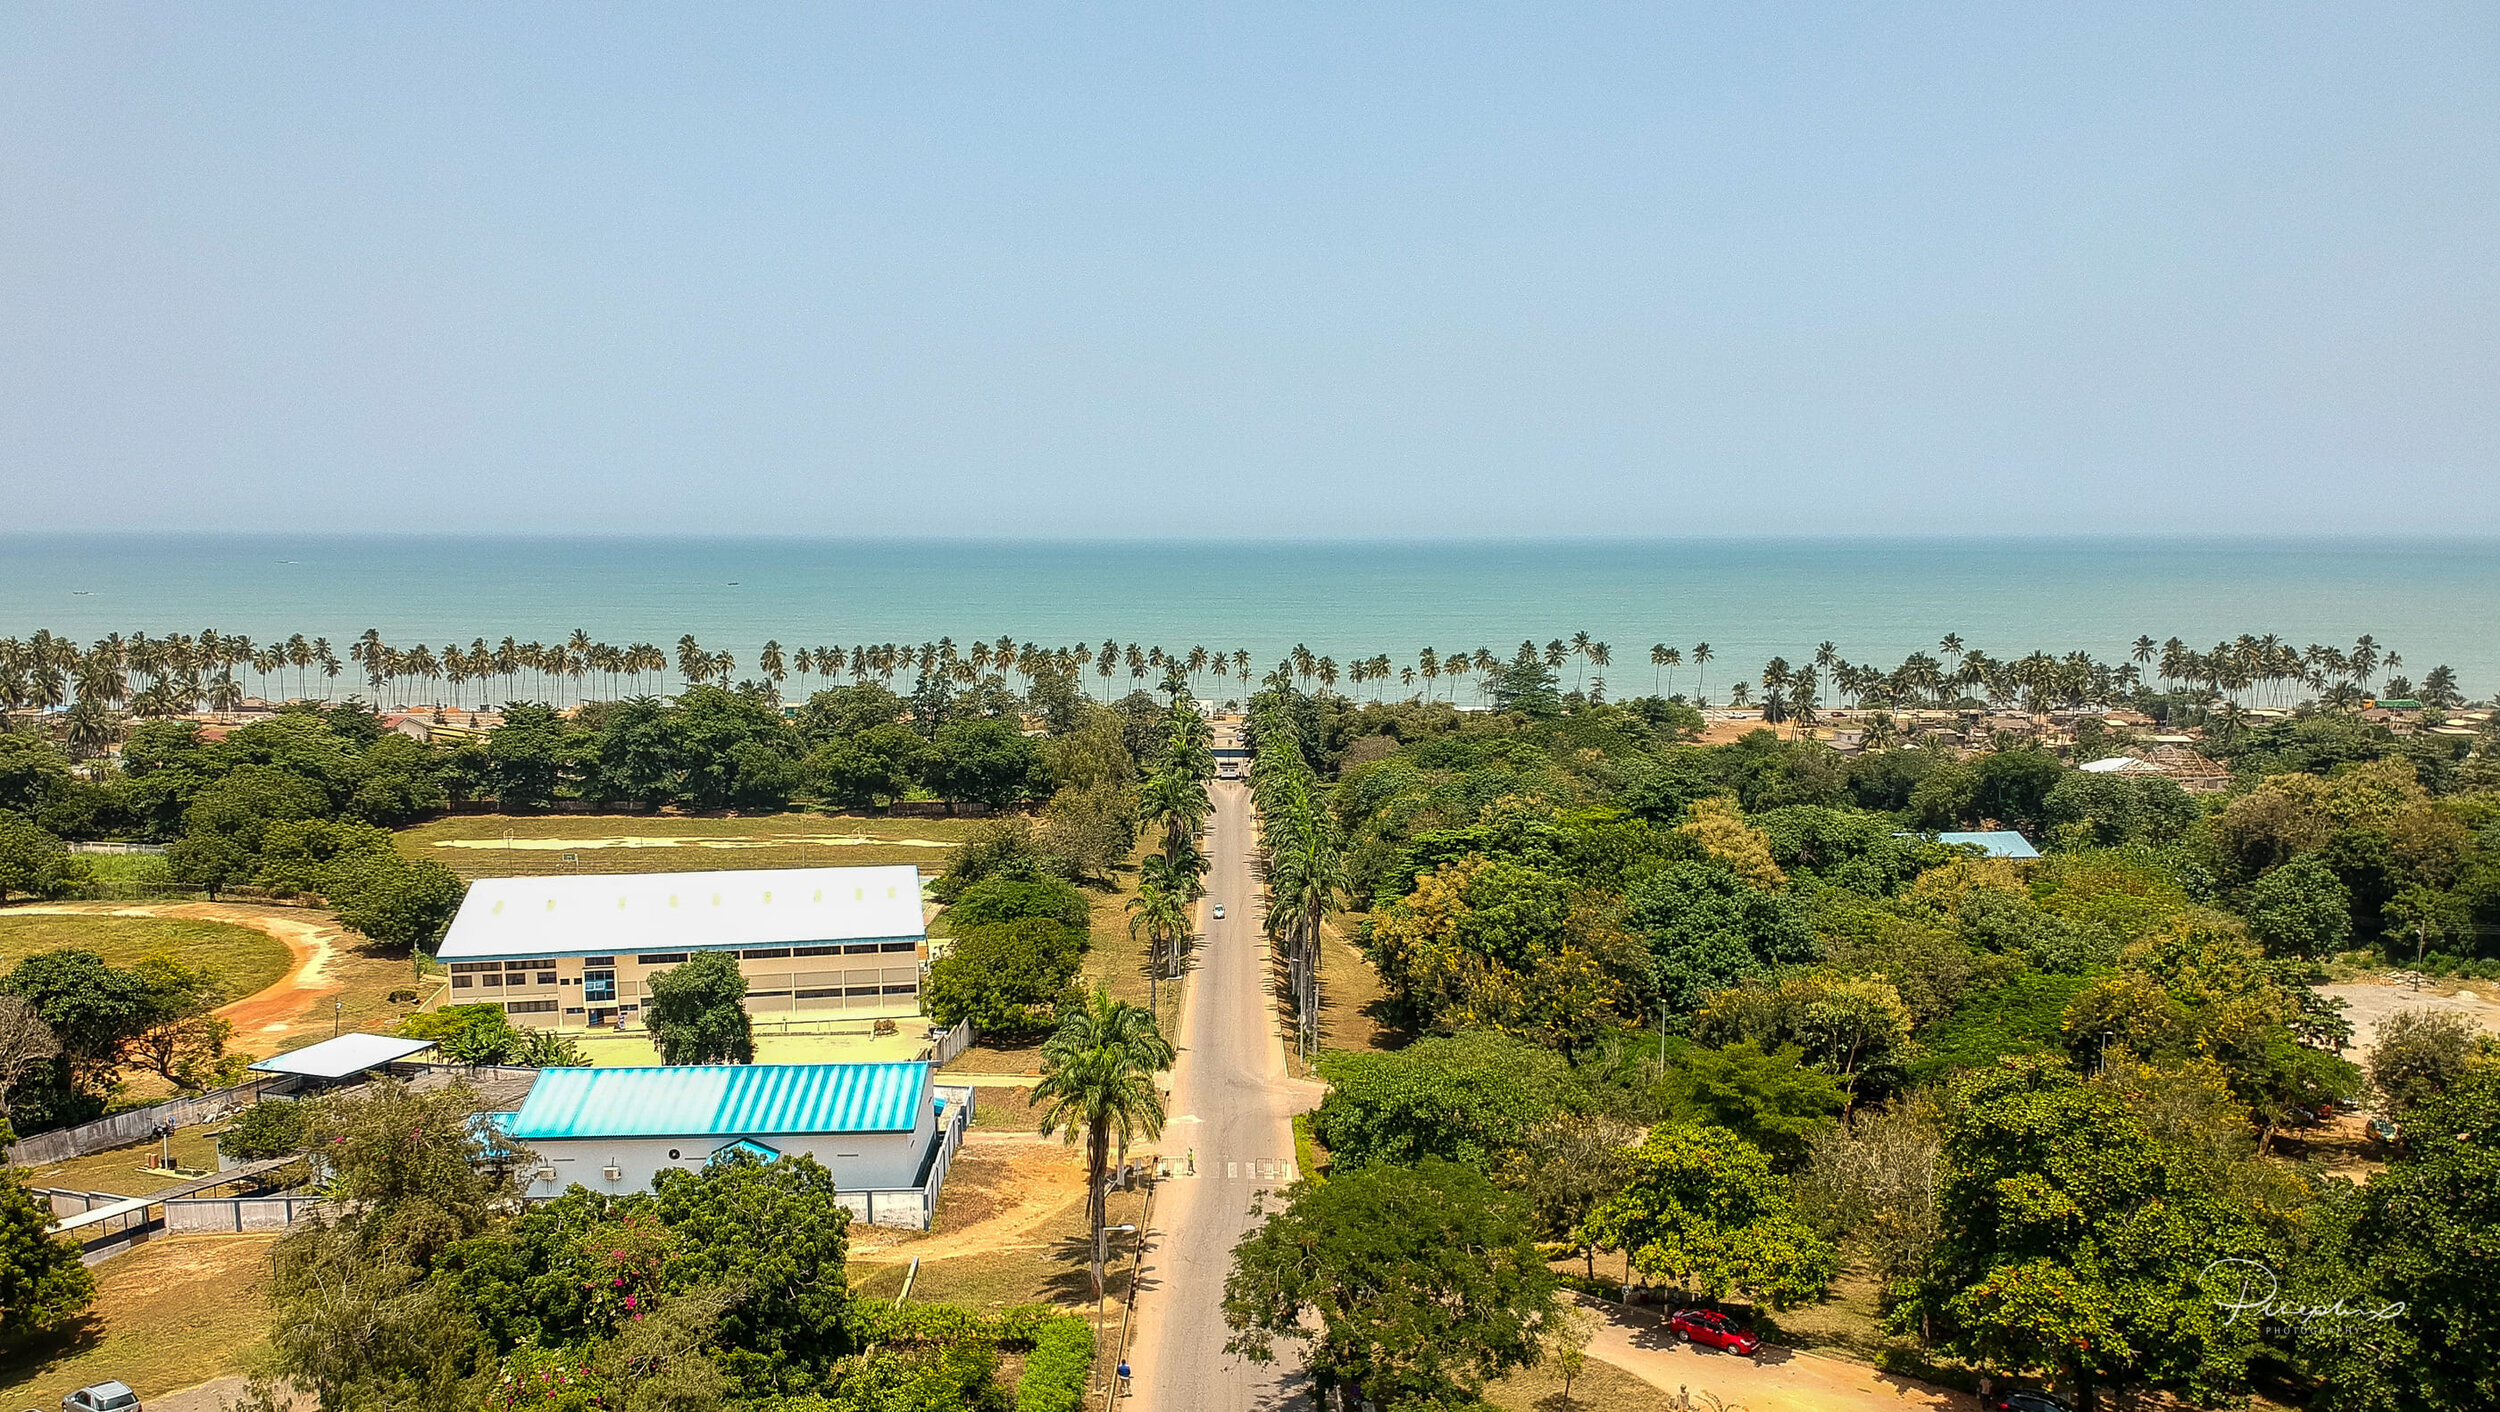 Bird's eye view of The Gulf of Guinea from the University of Cape Coast Old Site.jpg